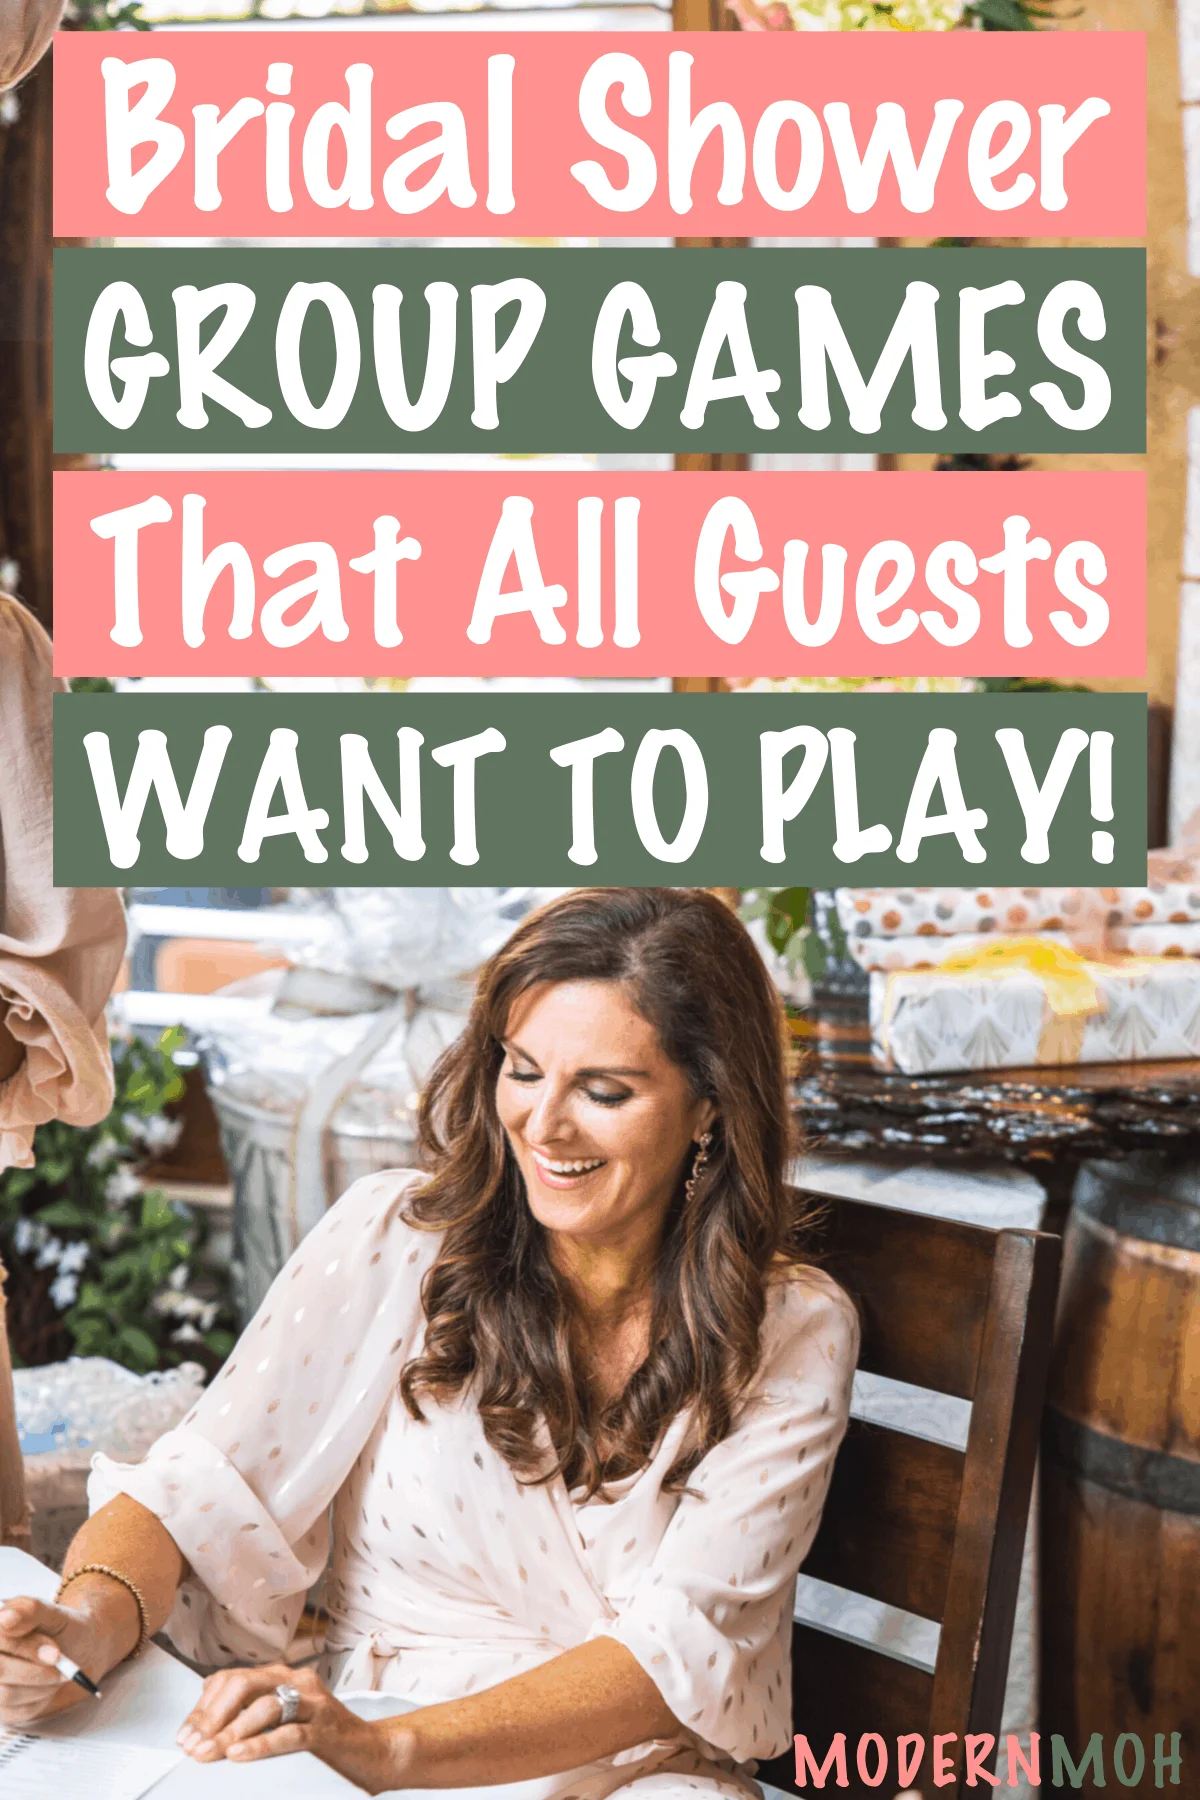 8 Bridal Shower Games Guests Actually Want To Play | Modern Moh